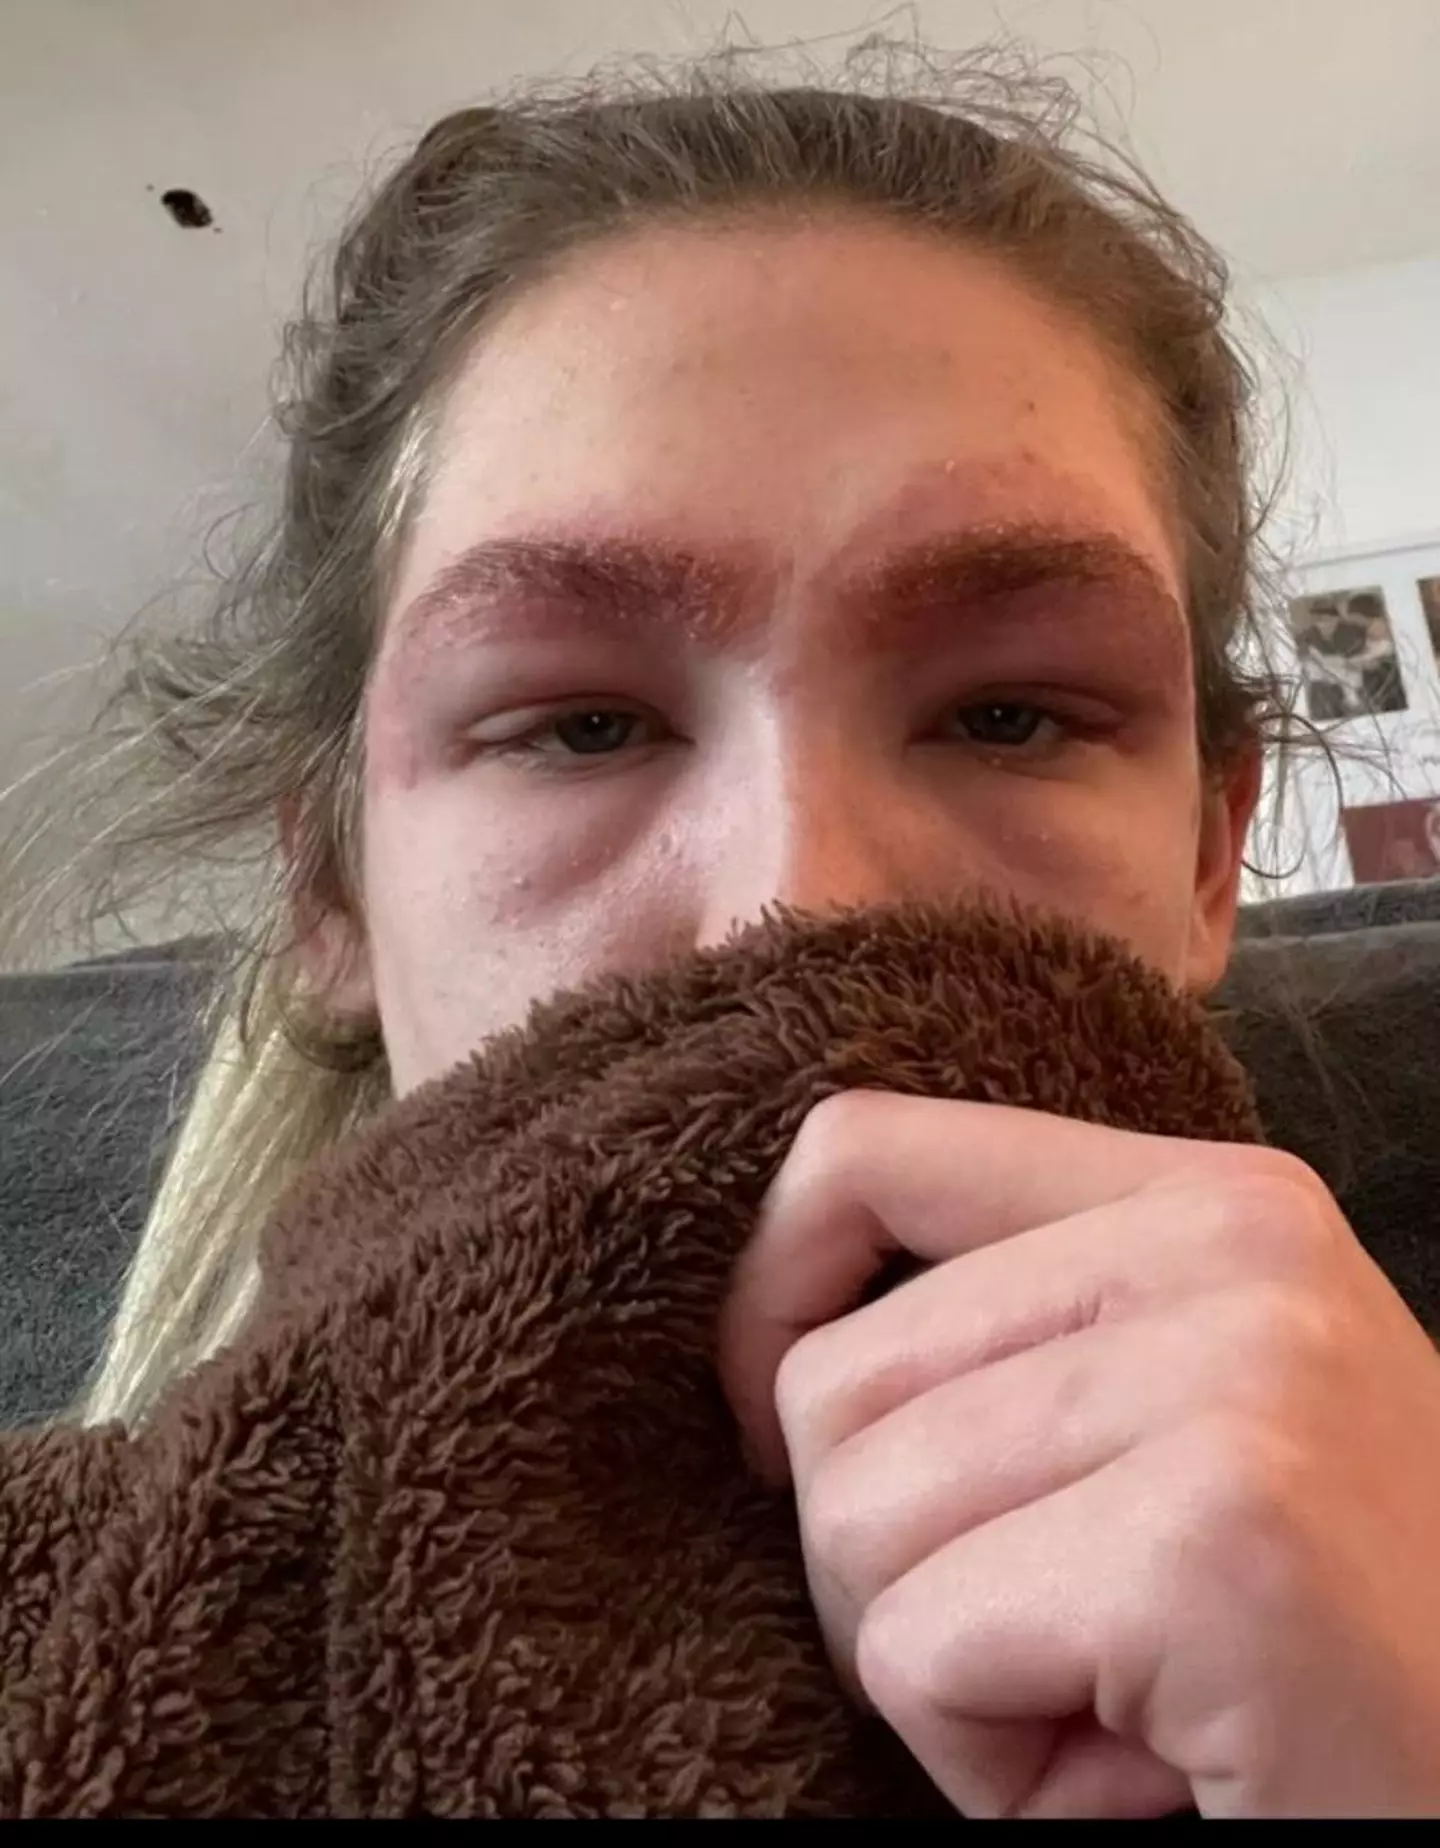 A woman was left hospitalised after suffering from an allergic reaction while getting her eyebrows tinted.